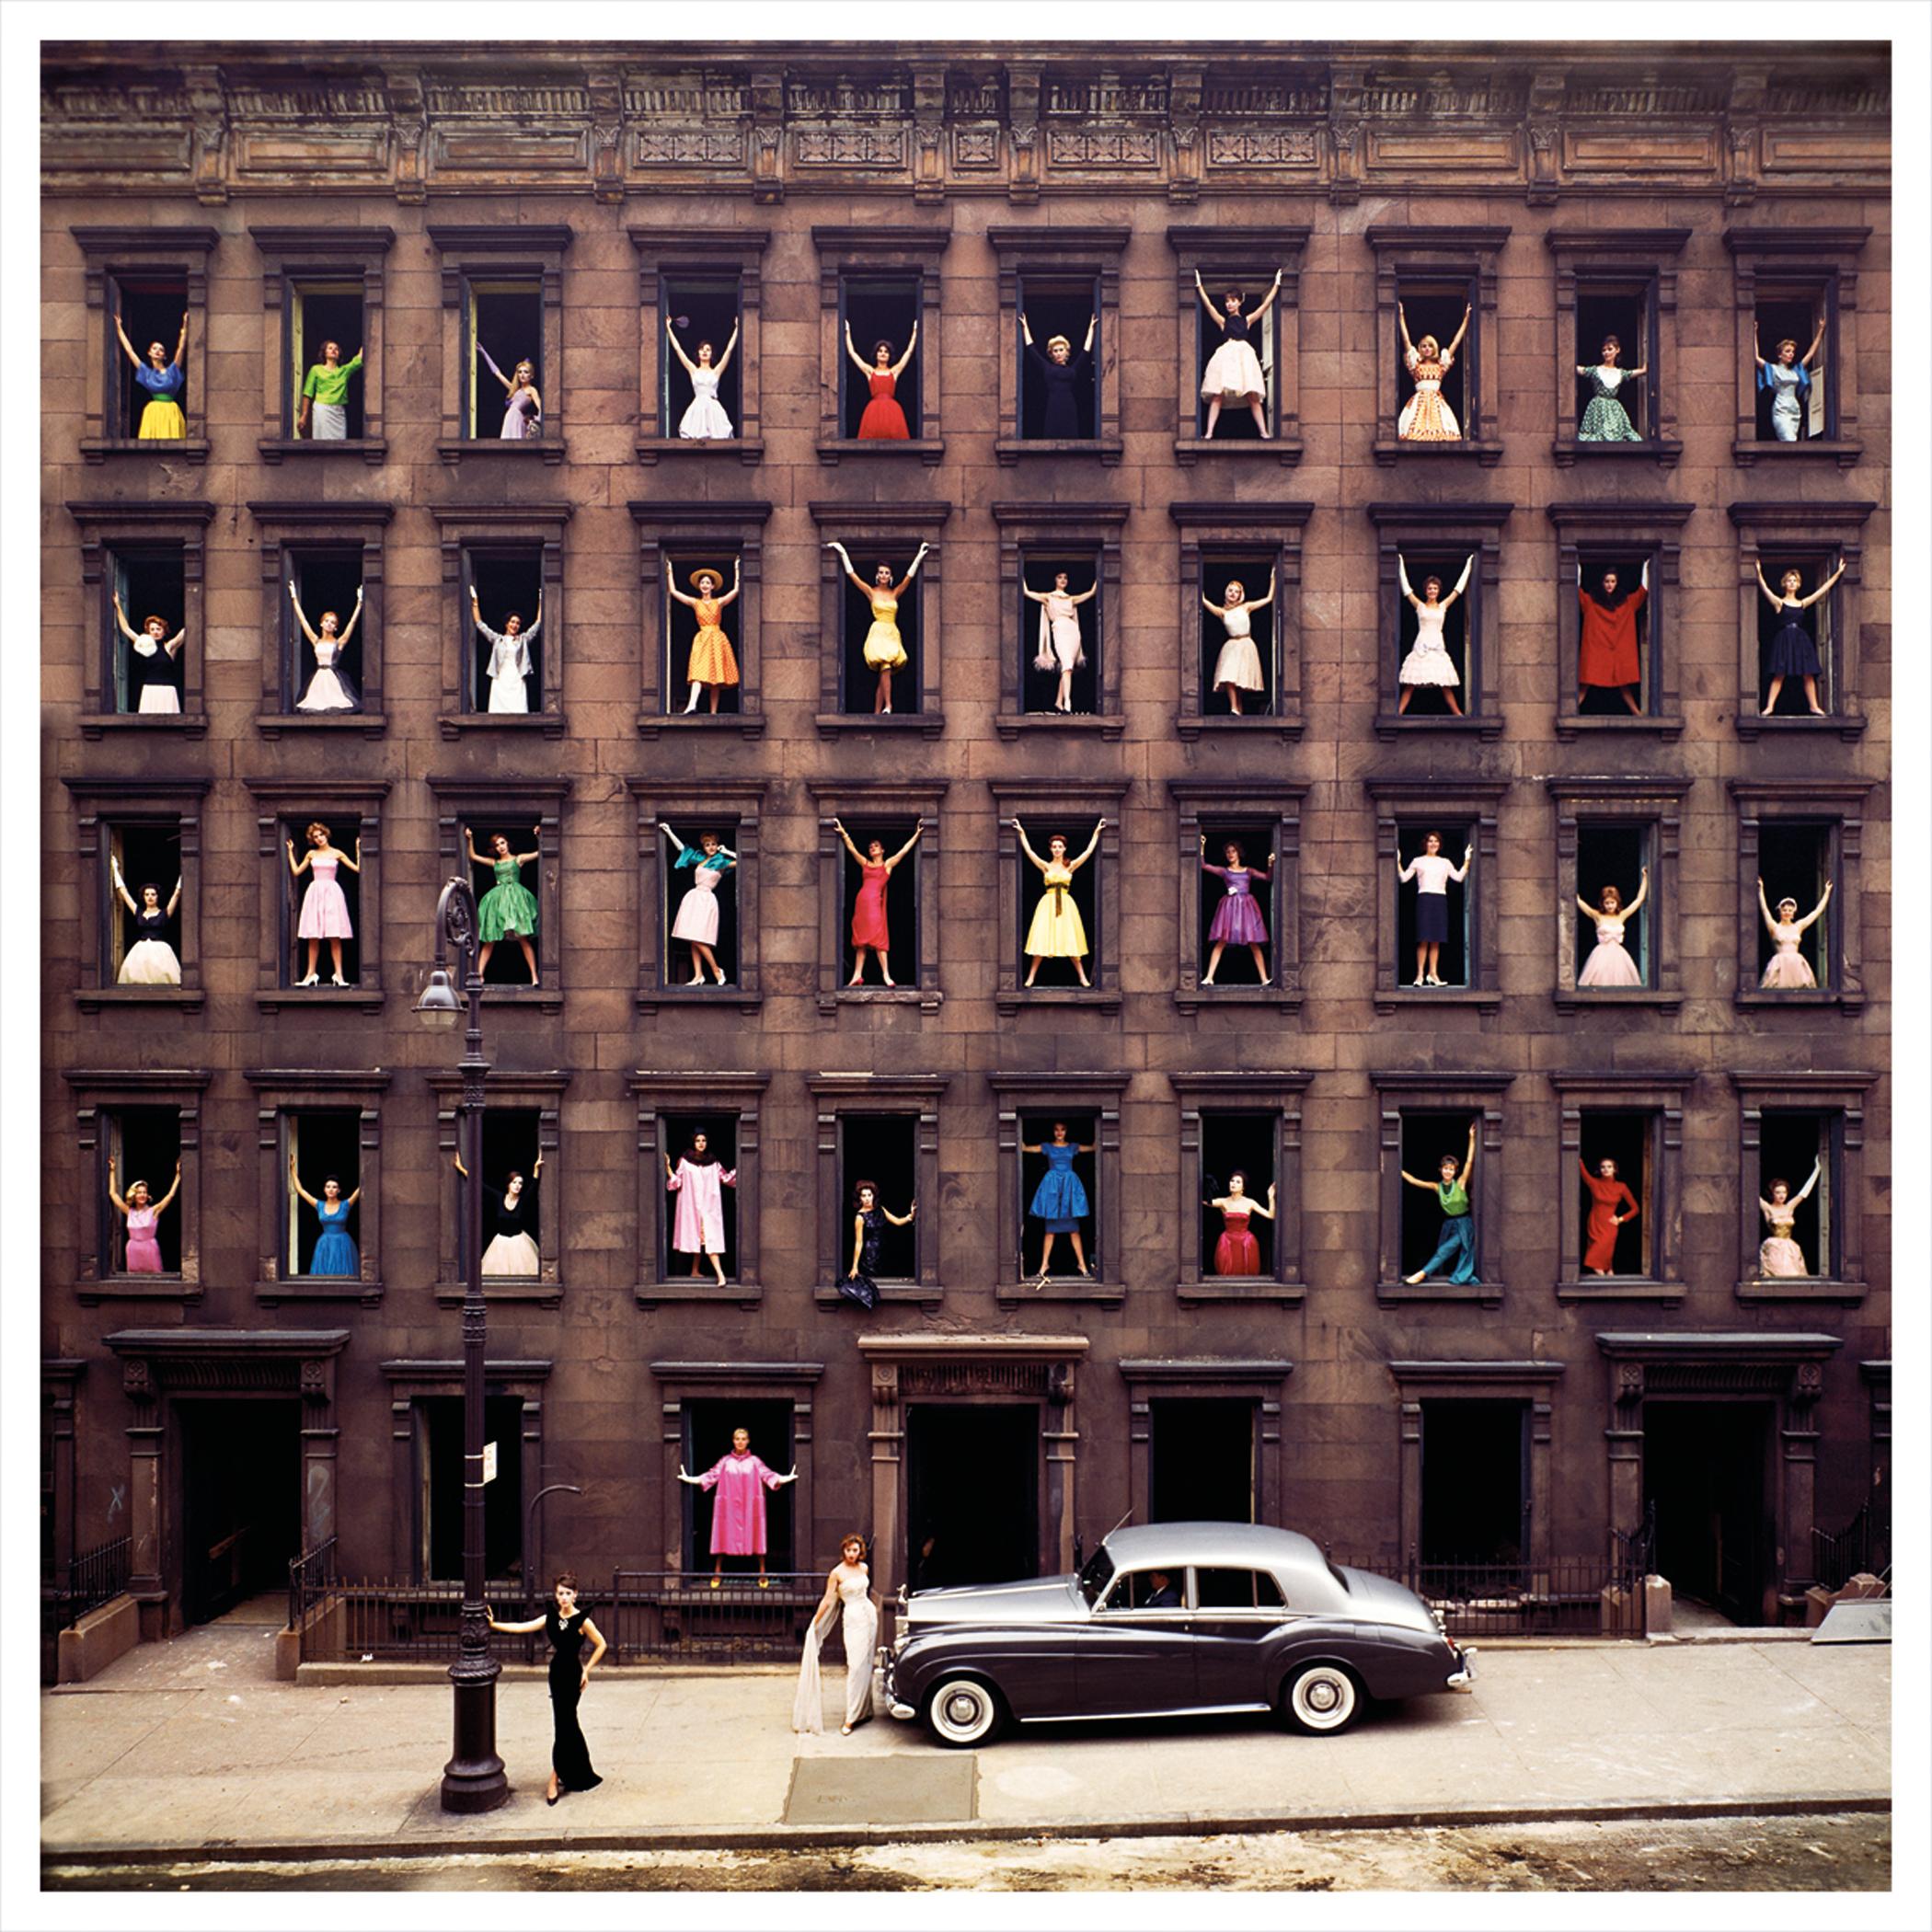 Ormond Gigli
Girls in the Window, 1960 (printed later)
Color coupler print
60 x 60 inches
Edition of 4
Signed, numbered and dated by the artist

Ormond Gigli: The Visionary Behind the "Girls in the Windows"
Ormond Gigli is a highly regarded American